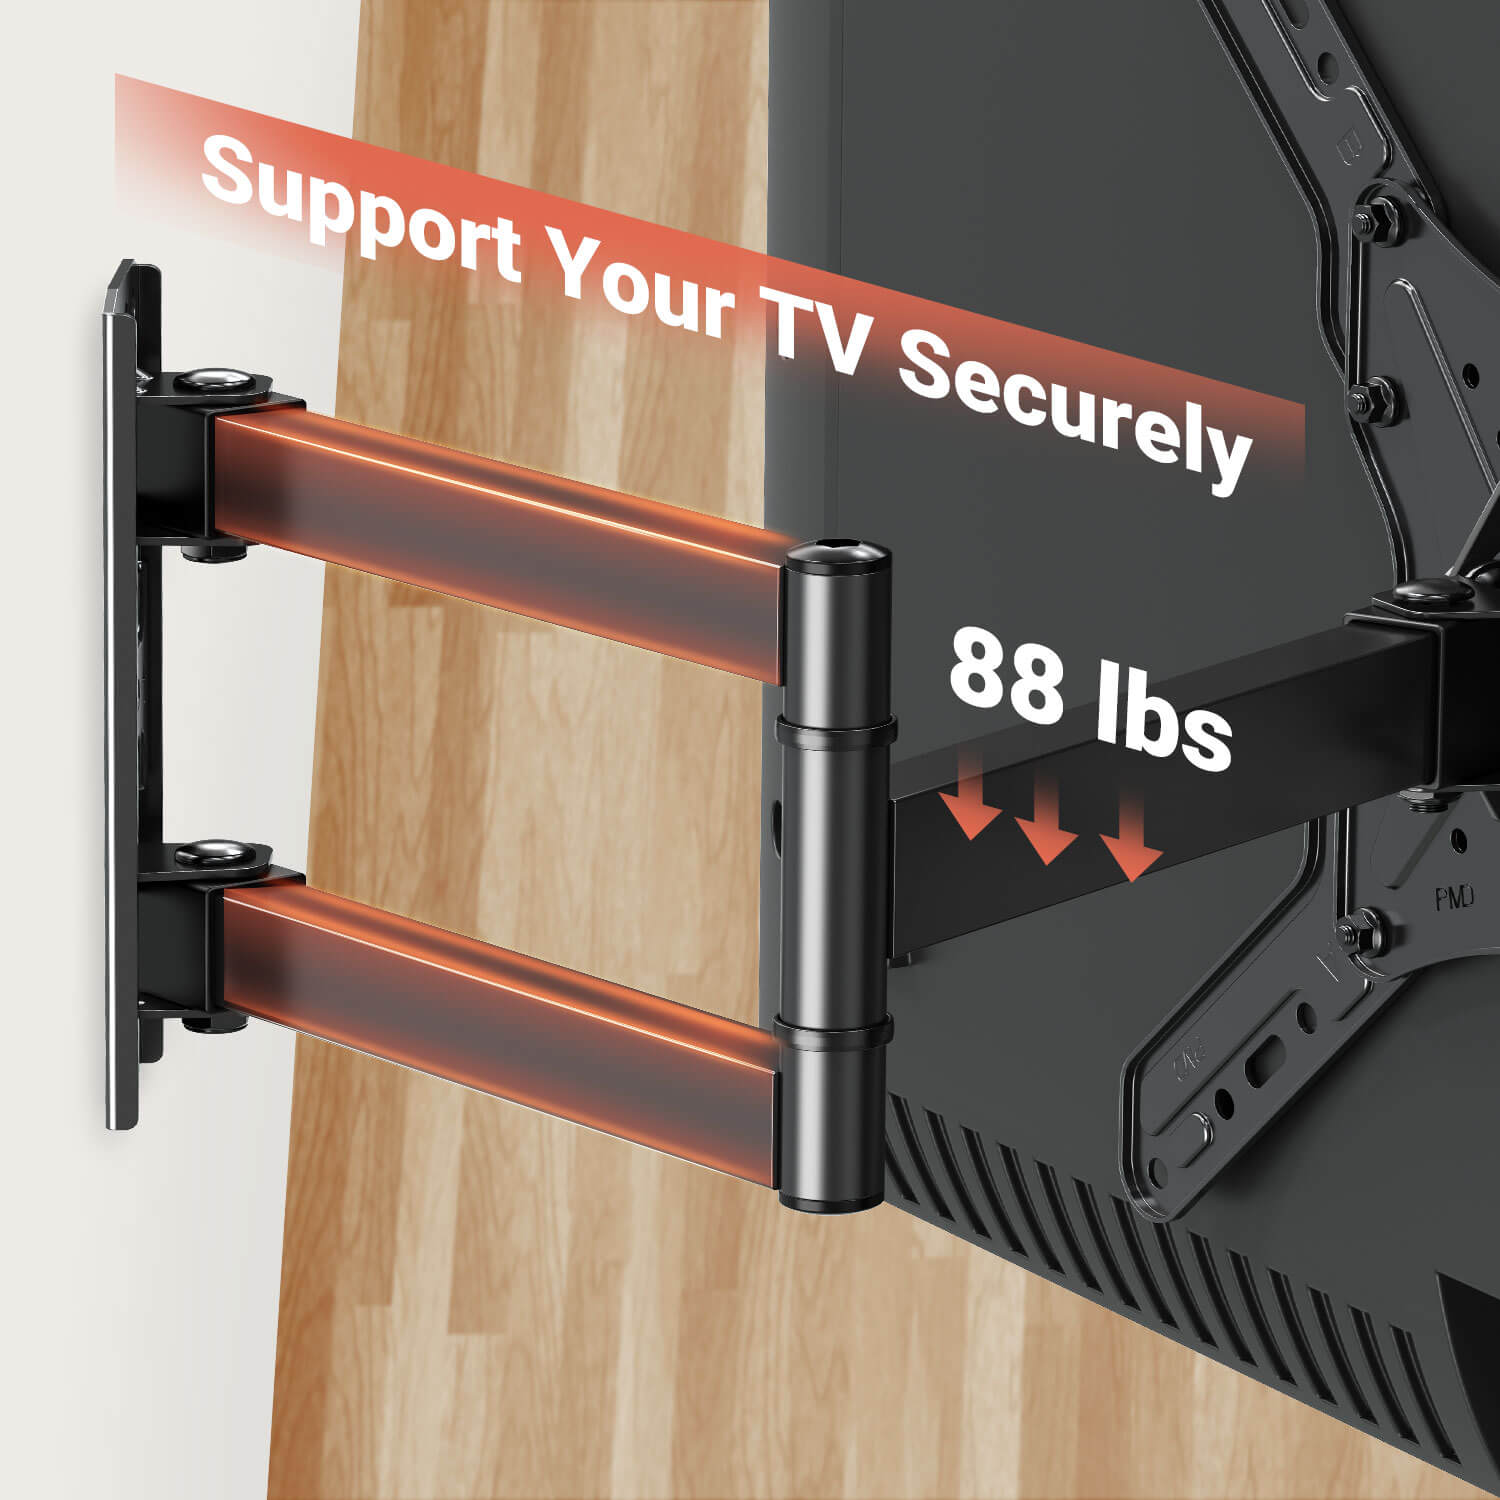 full motion TV wall mount loads up to 88 lbs